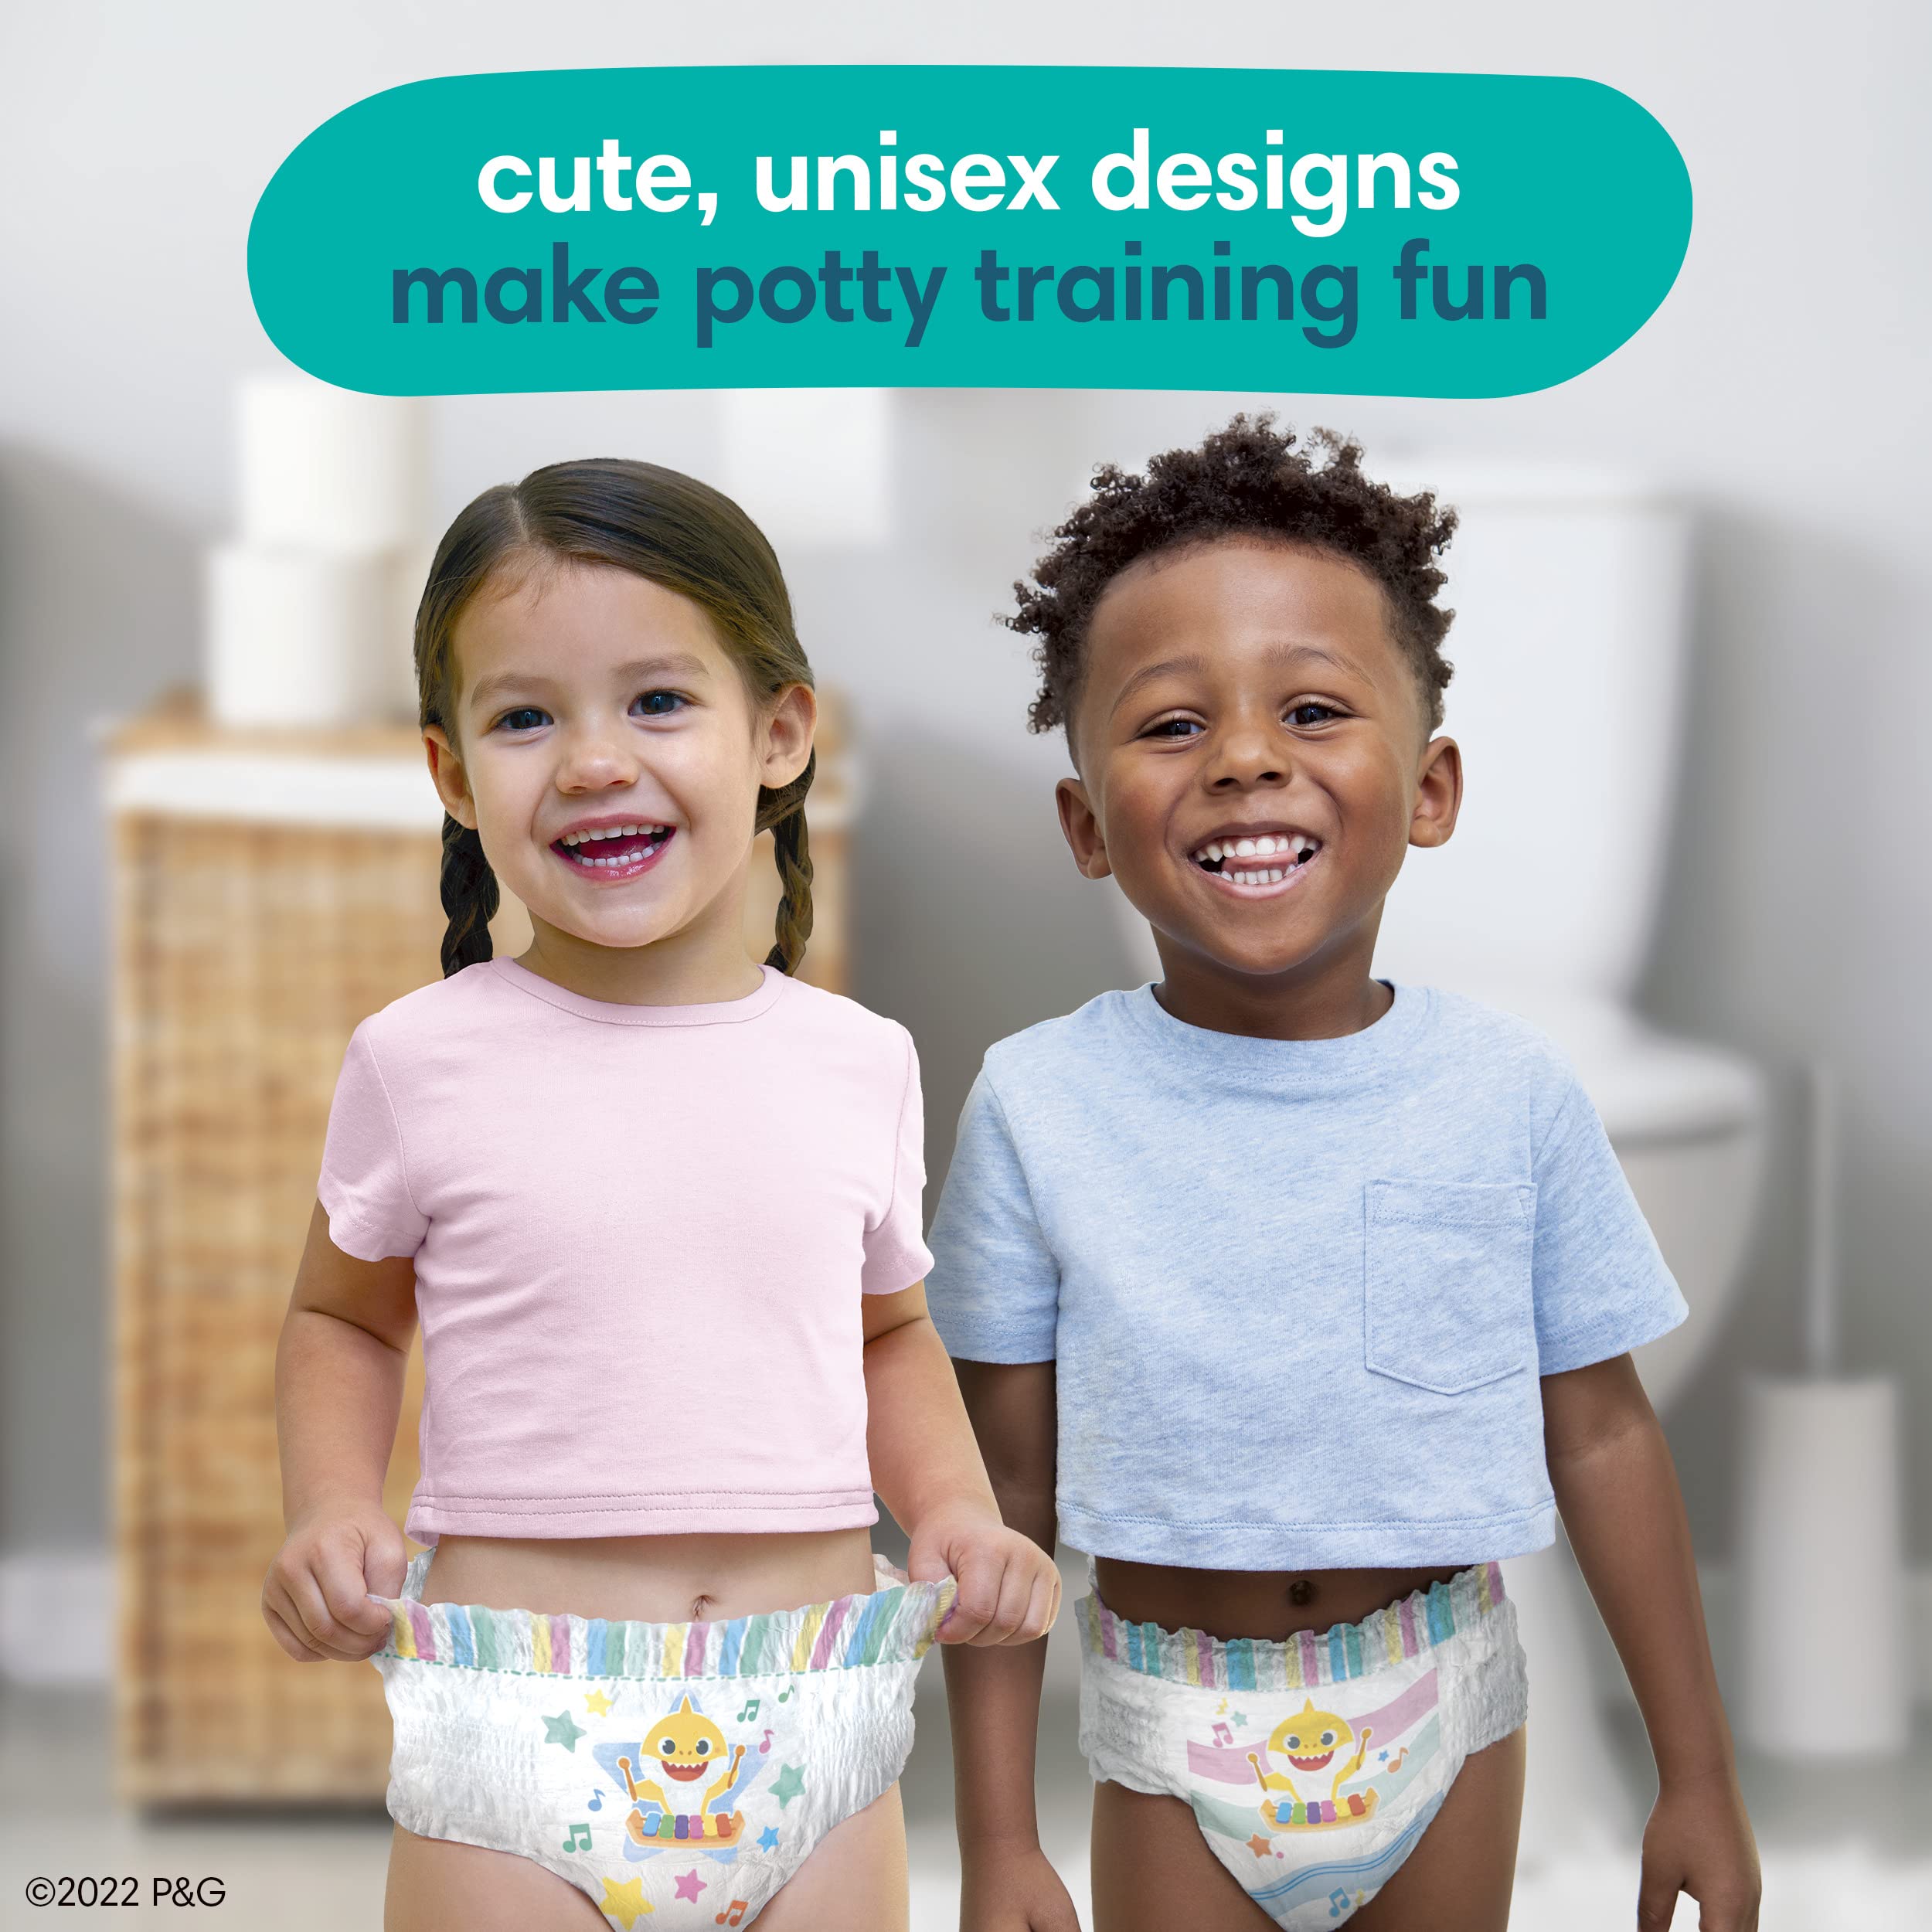 Buy Pampers Pure Protection Training Underwear, Baby Shark, 2T-3T